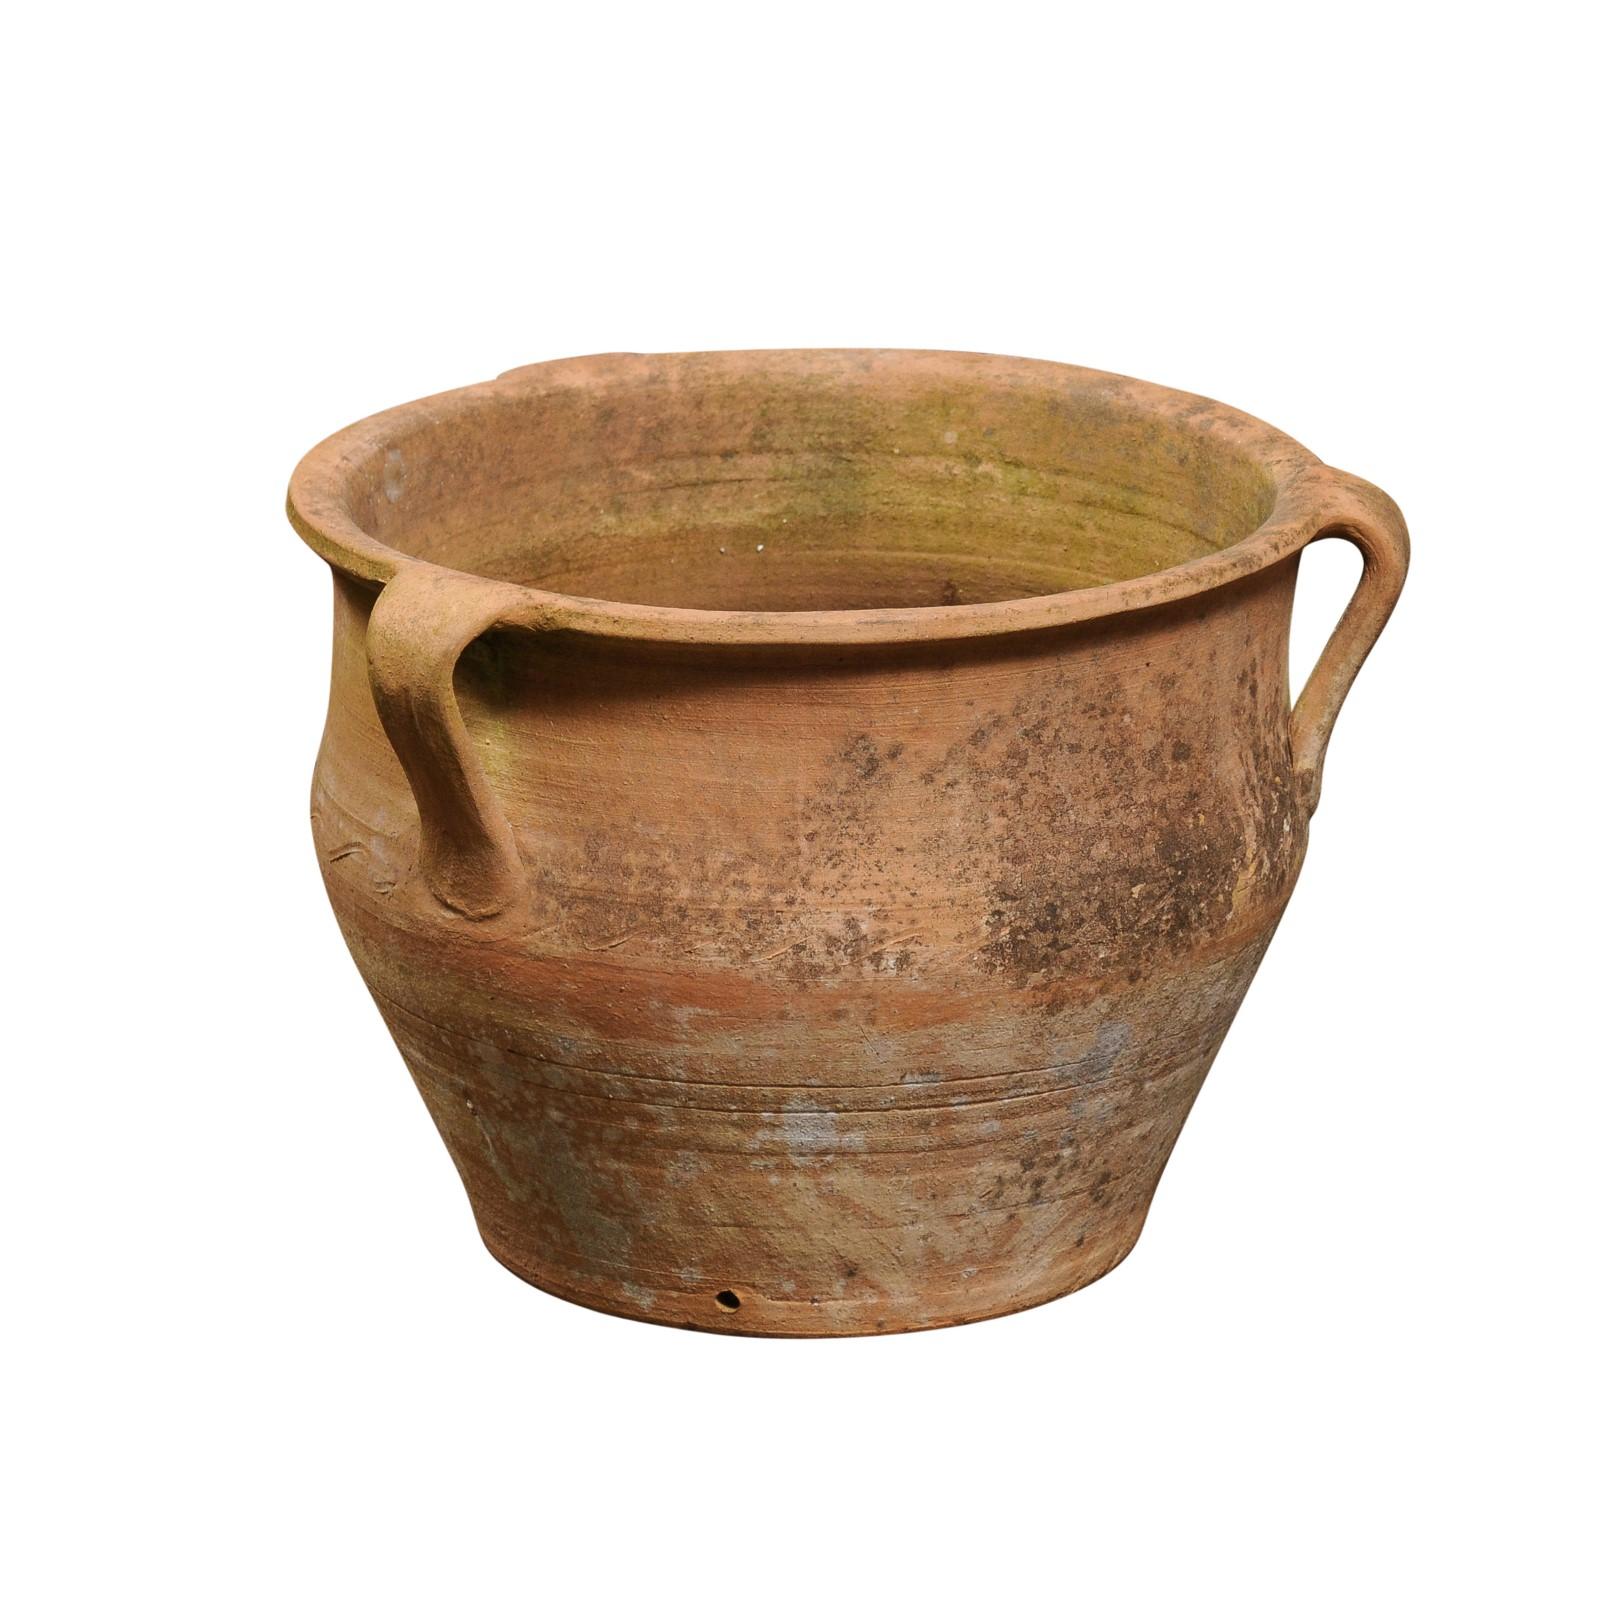 An English Turn of the century terracotta planter from the early 20th century, with three handles, wavy motifs and weathered patina. Created in England during the 20th century, this terracotta planter charms us with its generous round silhouette